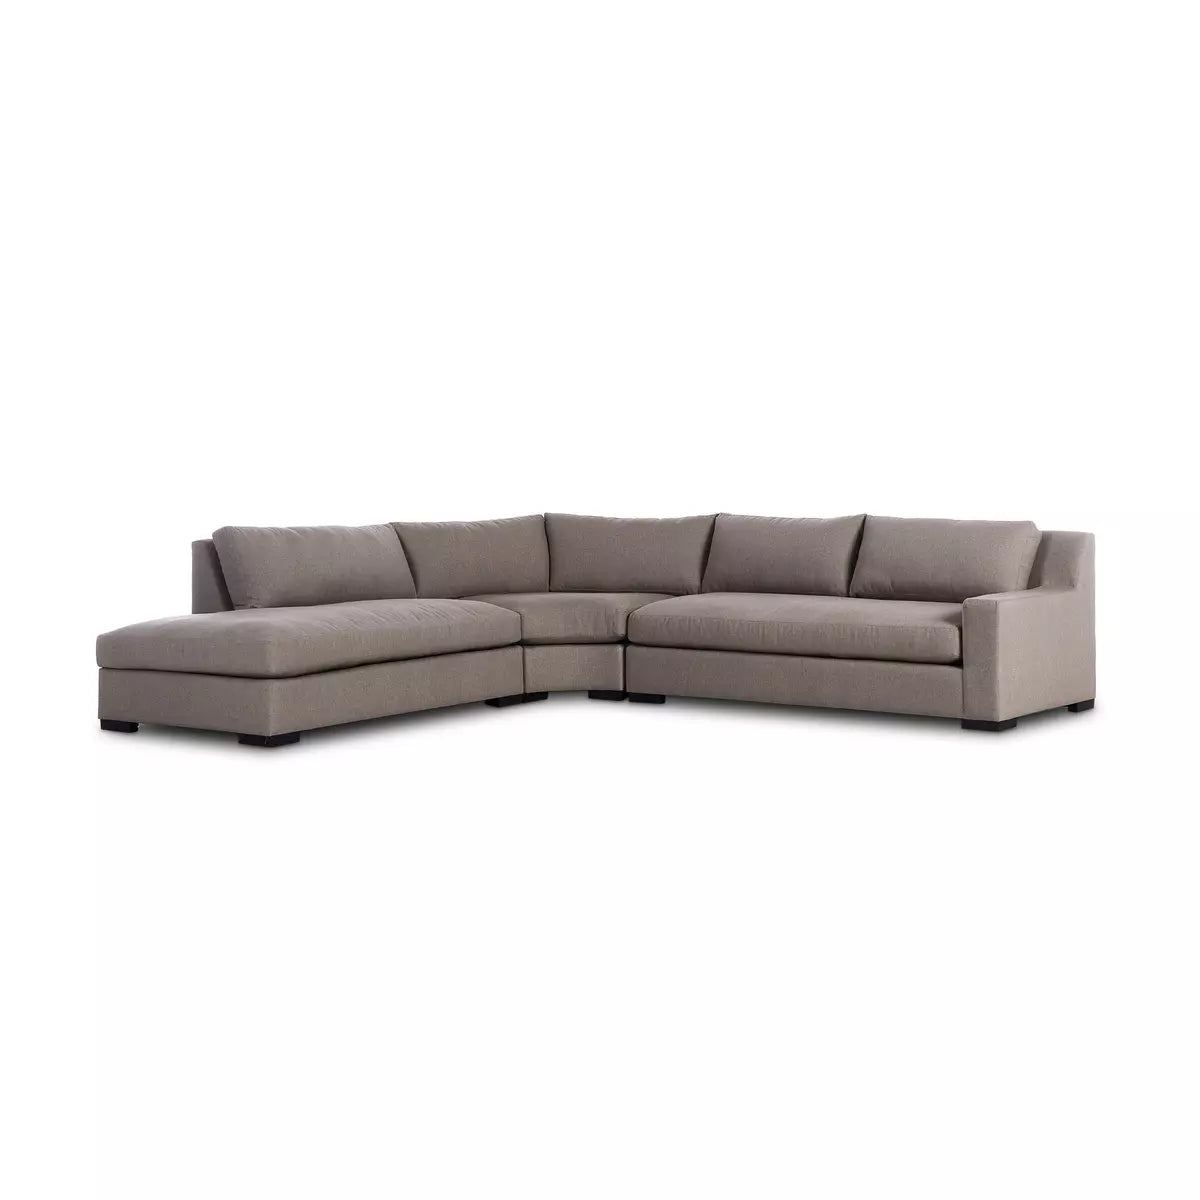 Albany 3-Piece Sectional Left Facing Bumper Chaise Vesuvio Cafe